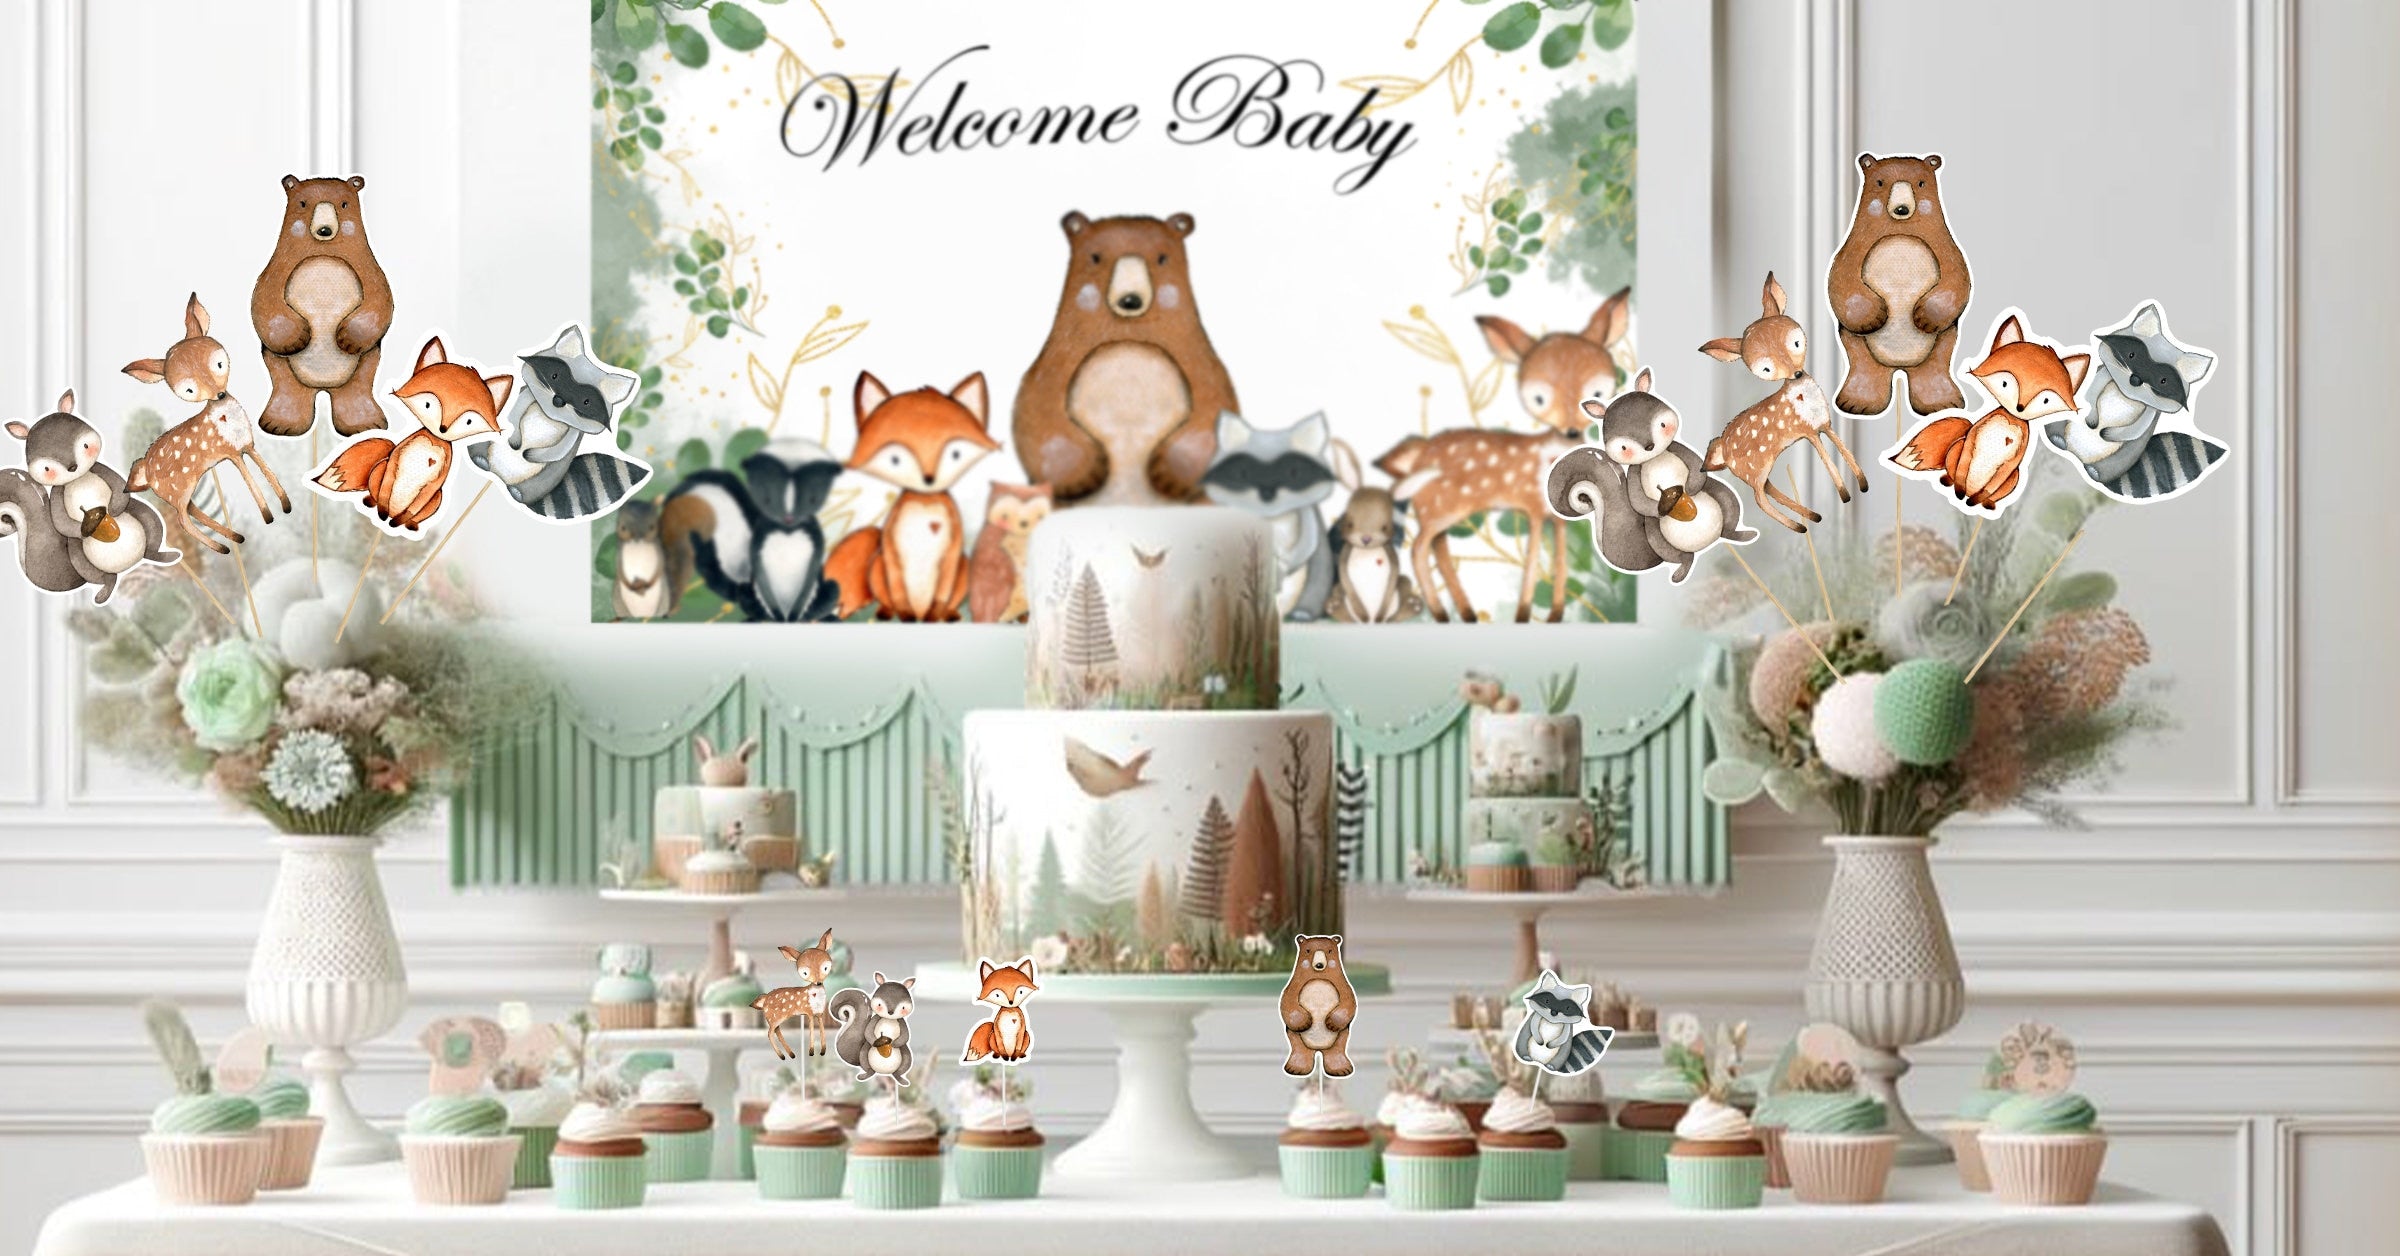 Enchanted Woodland Party Decor Set for Baby Shower & Birthday - Banner, Cake & Cupcake Toppers, Centerpieces